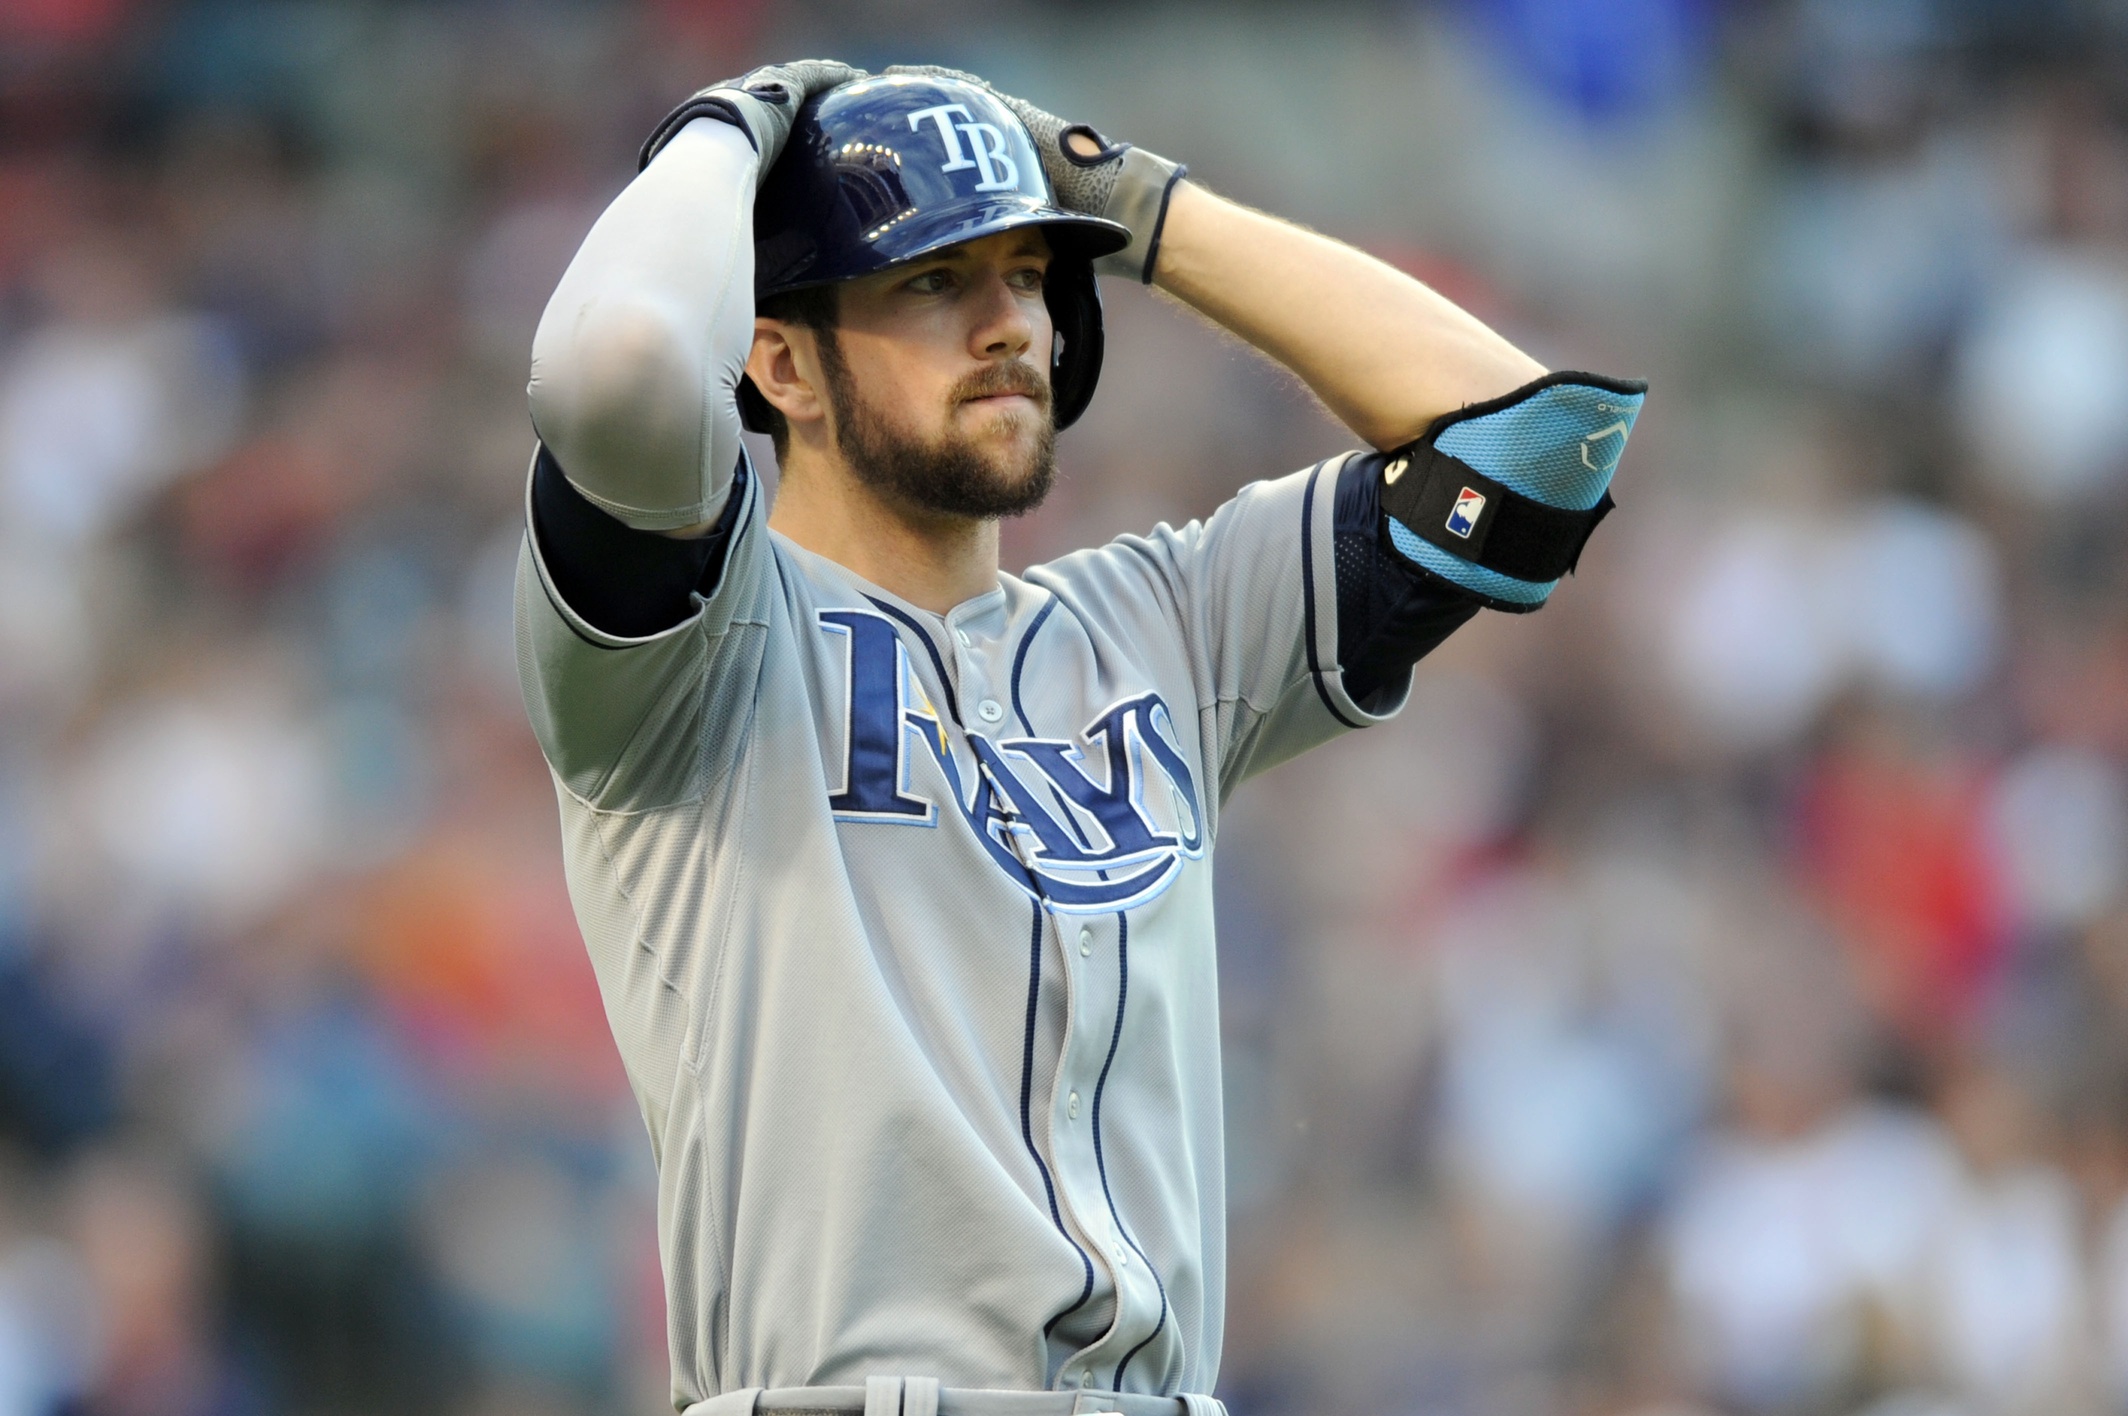 The Rays have one of the most powerful hitters in baseball but he is being held back by a maddening flaw